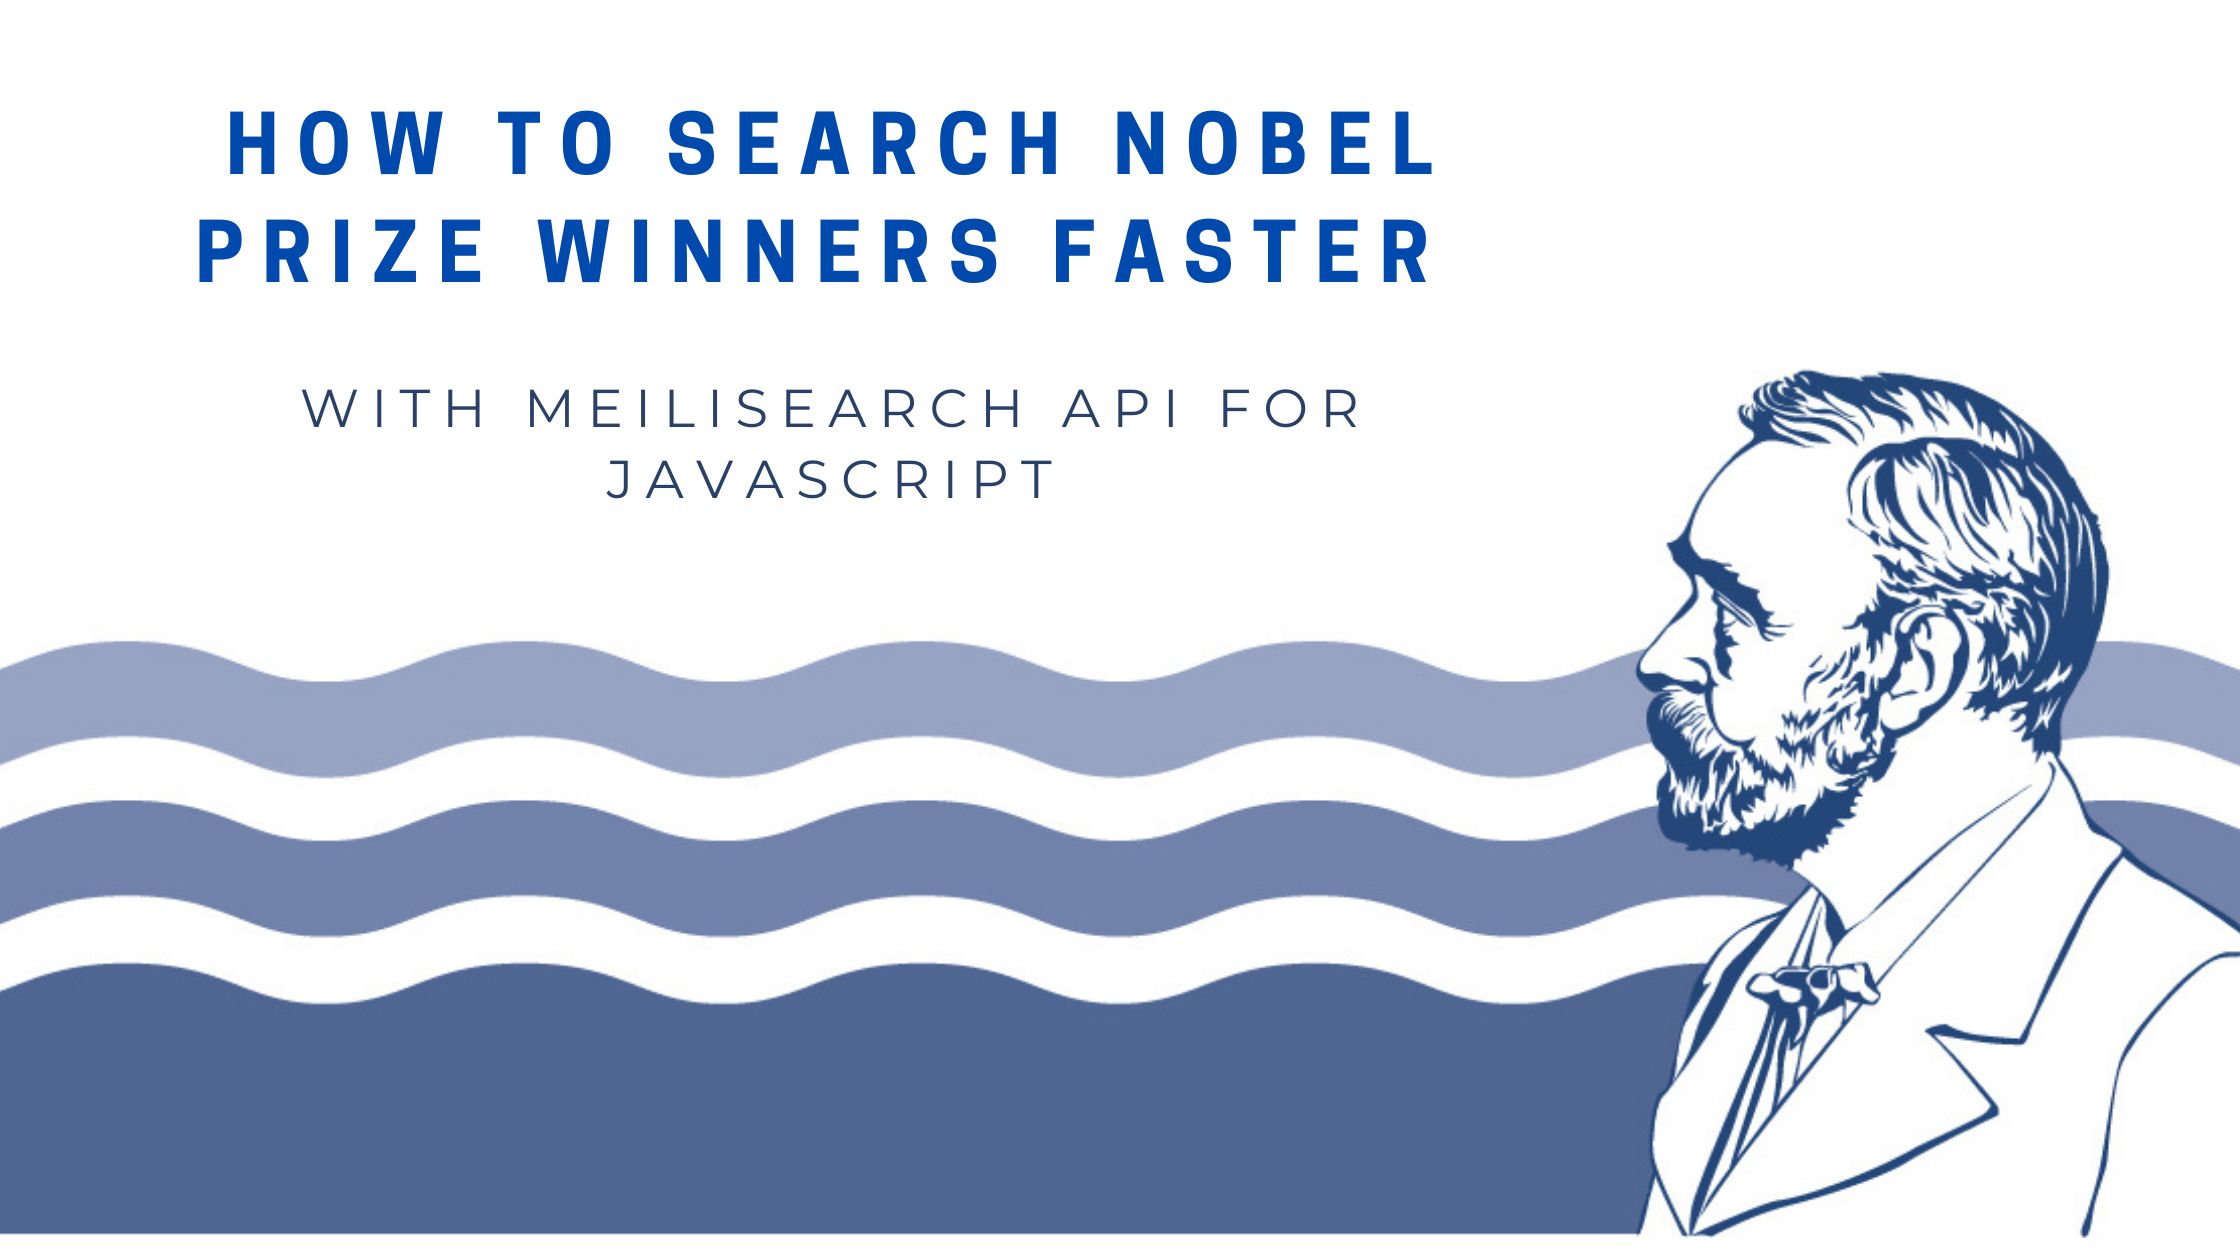 We Built A Search Engine With MeiliSearch and JavaScript